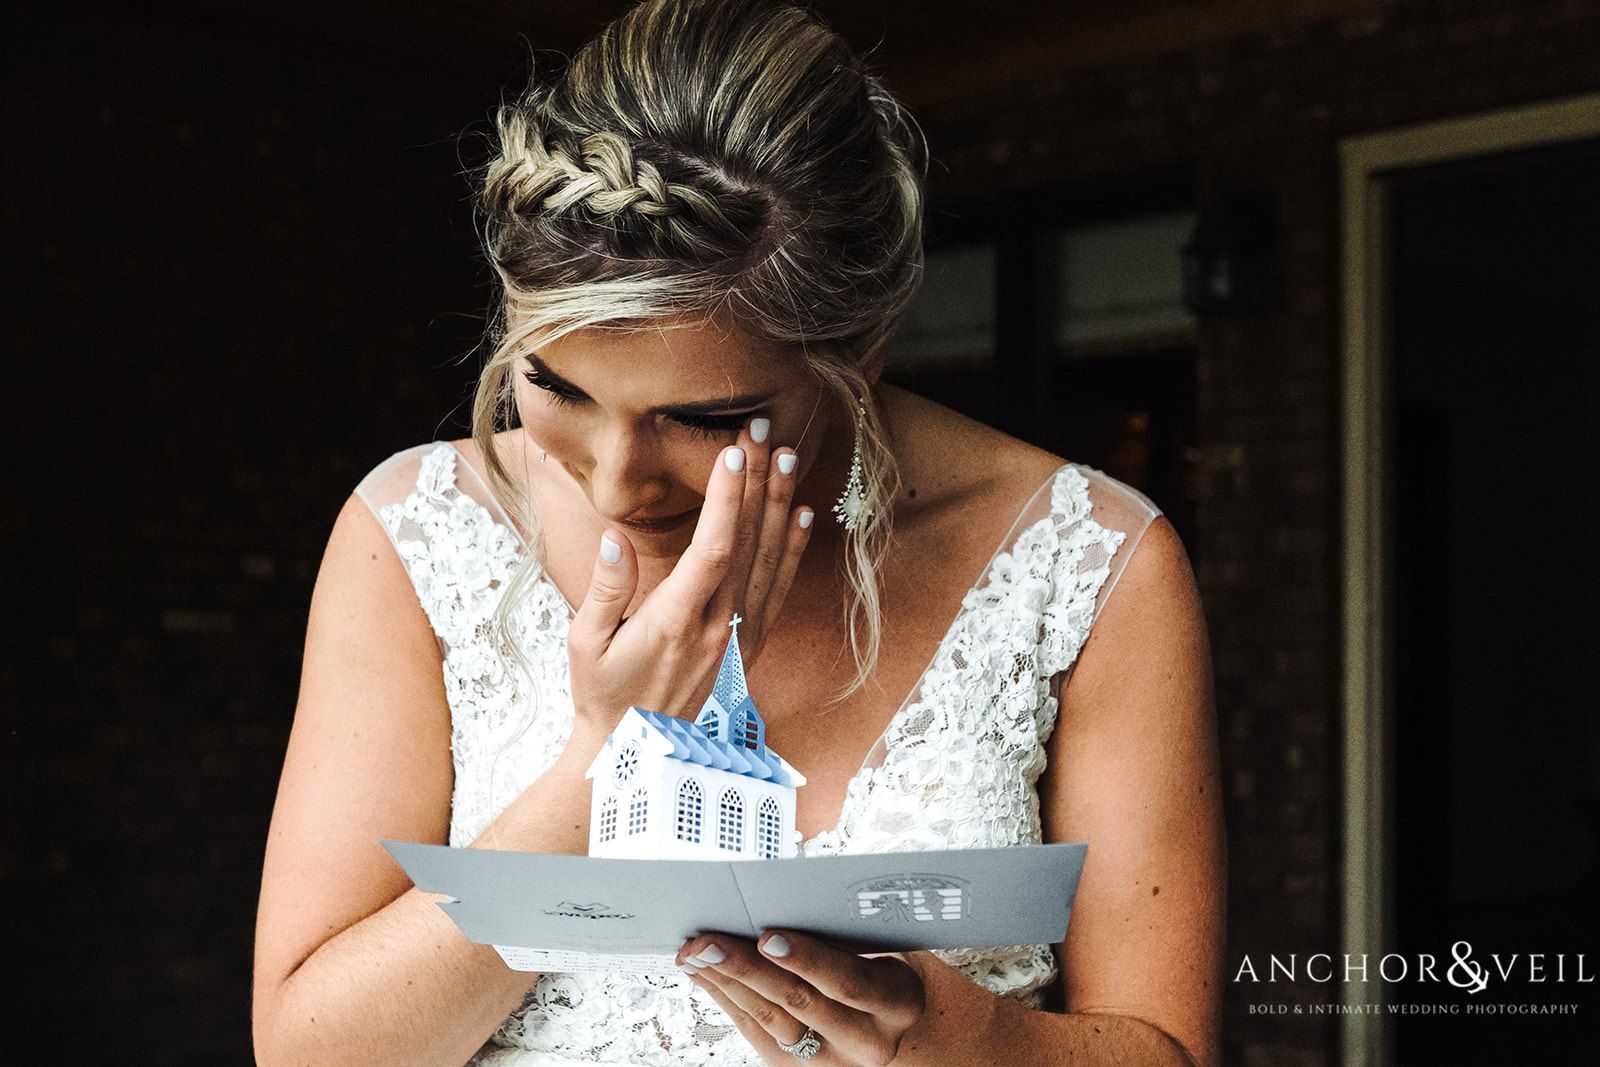 An emotional time for the Bride reading her message atThe Farm at Brusharbor Wedding